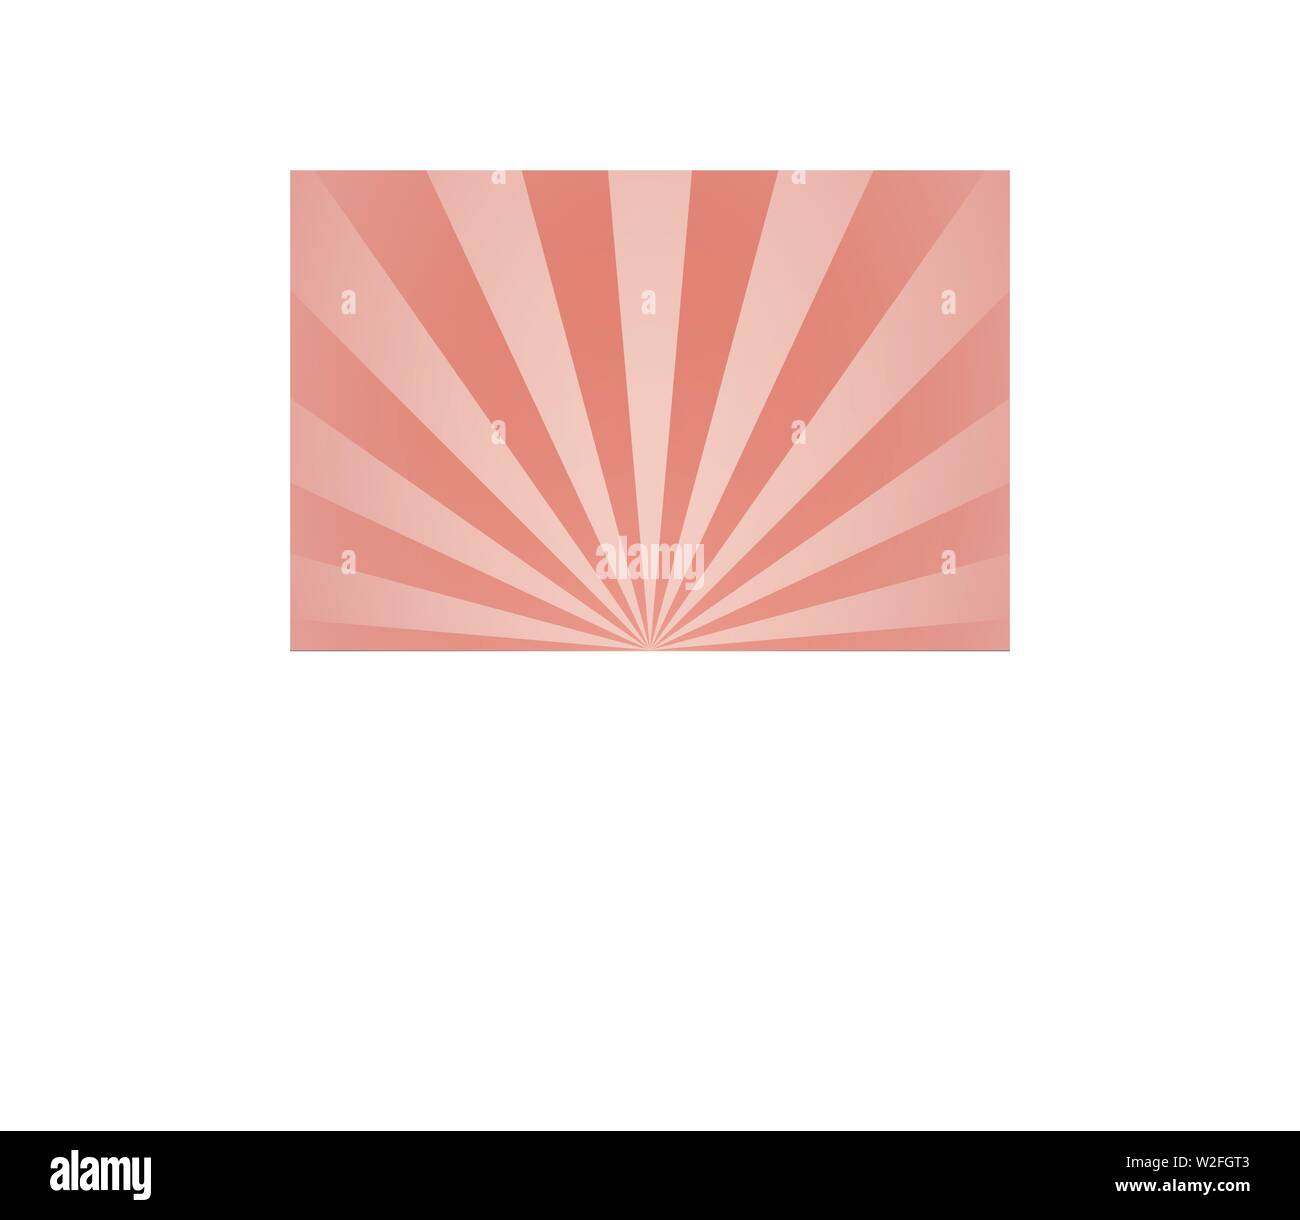 Pink beams and rays abstract vector illustration radial lines girly background Stock Vector